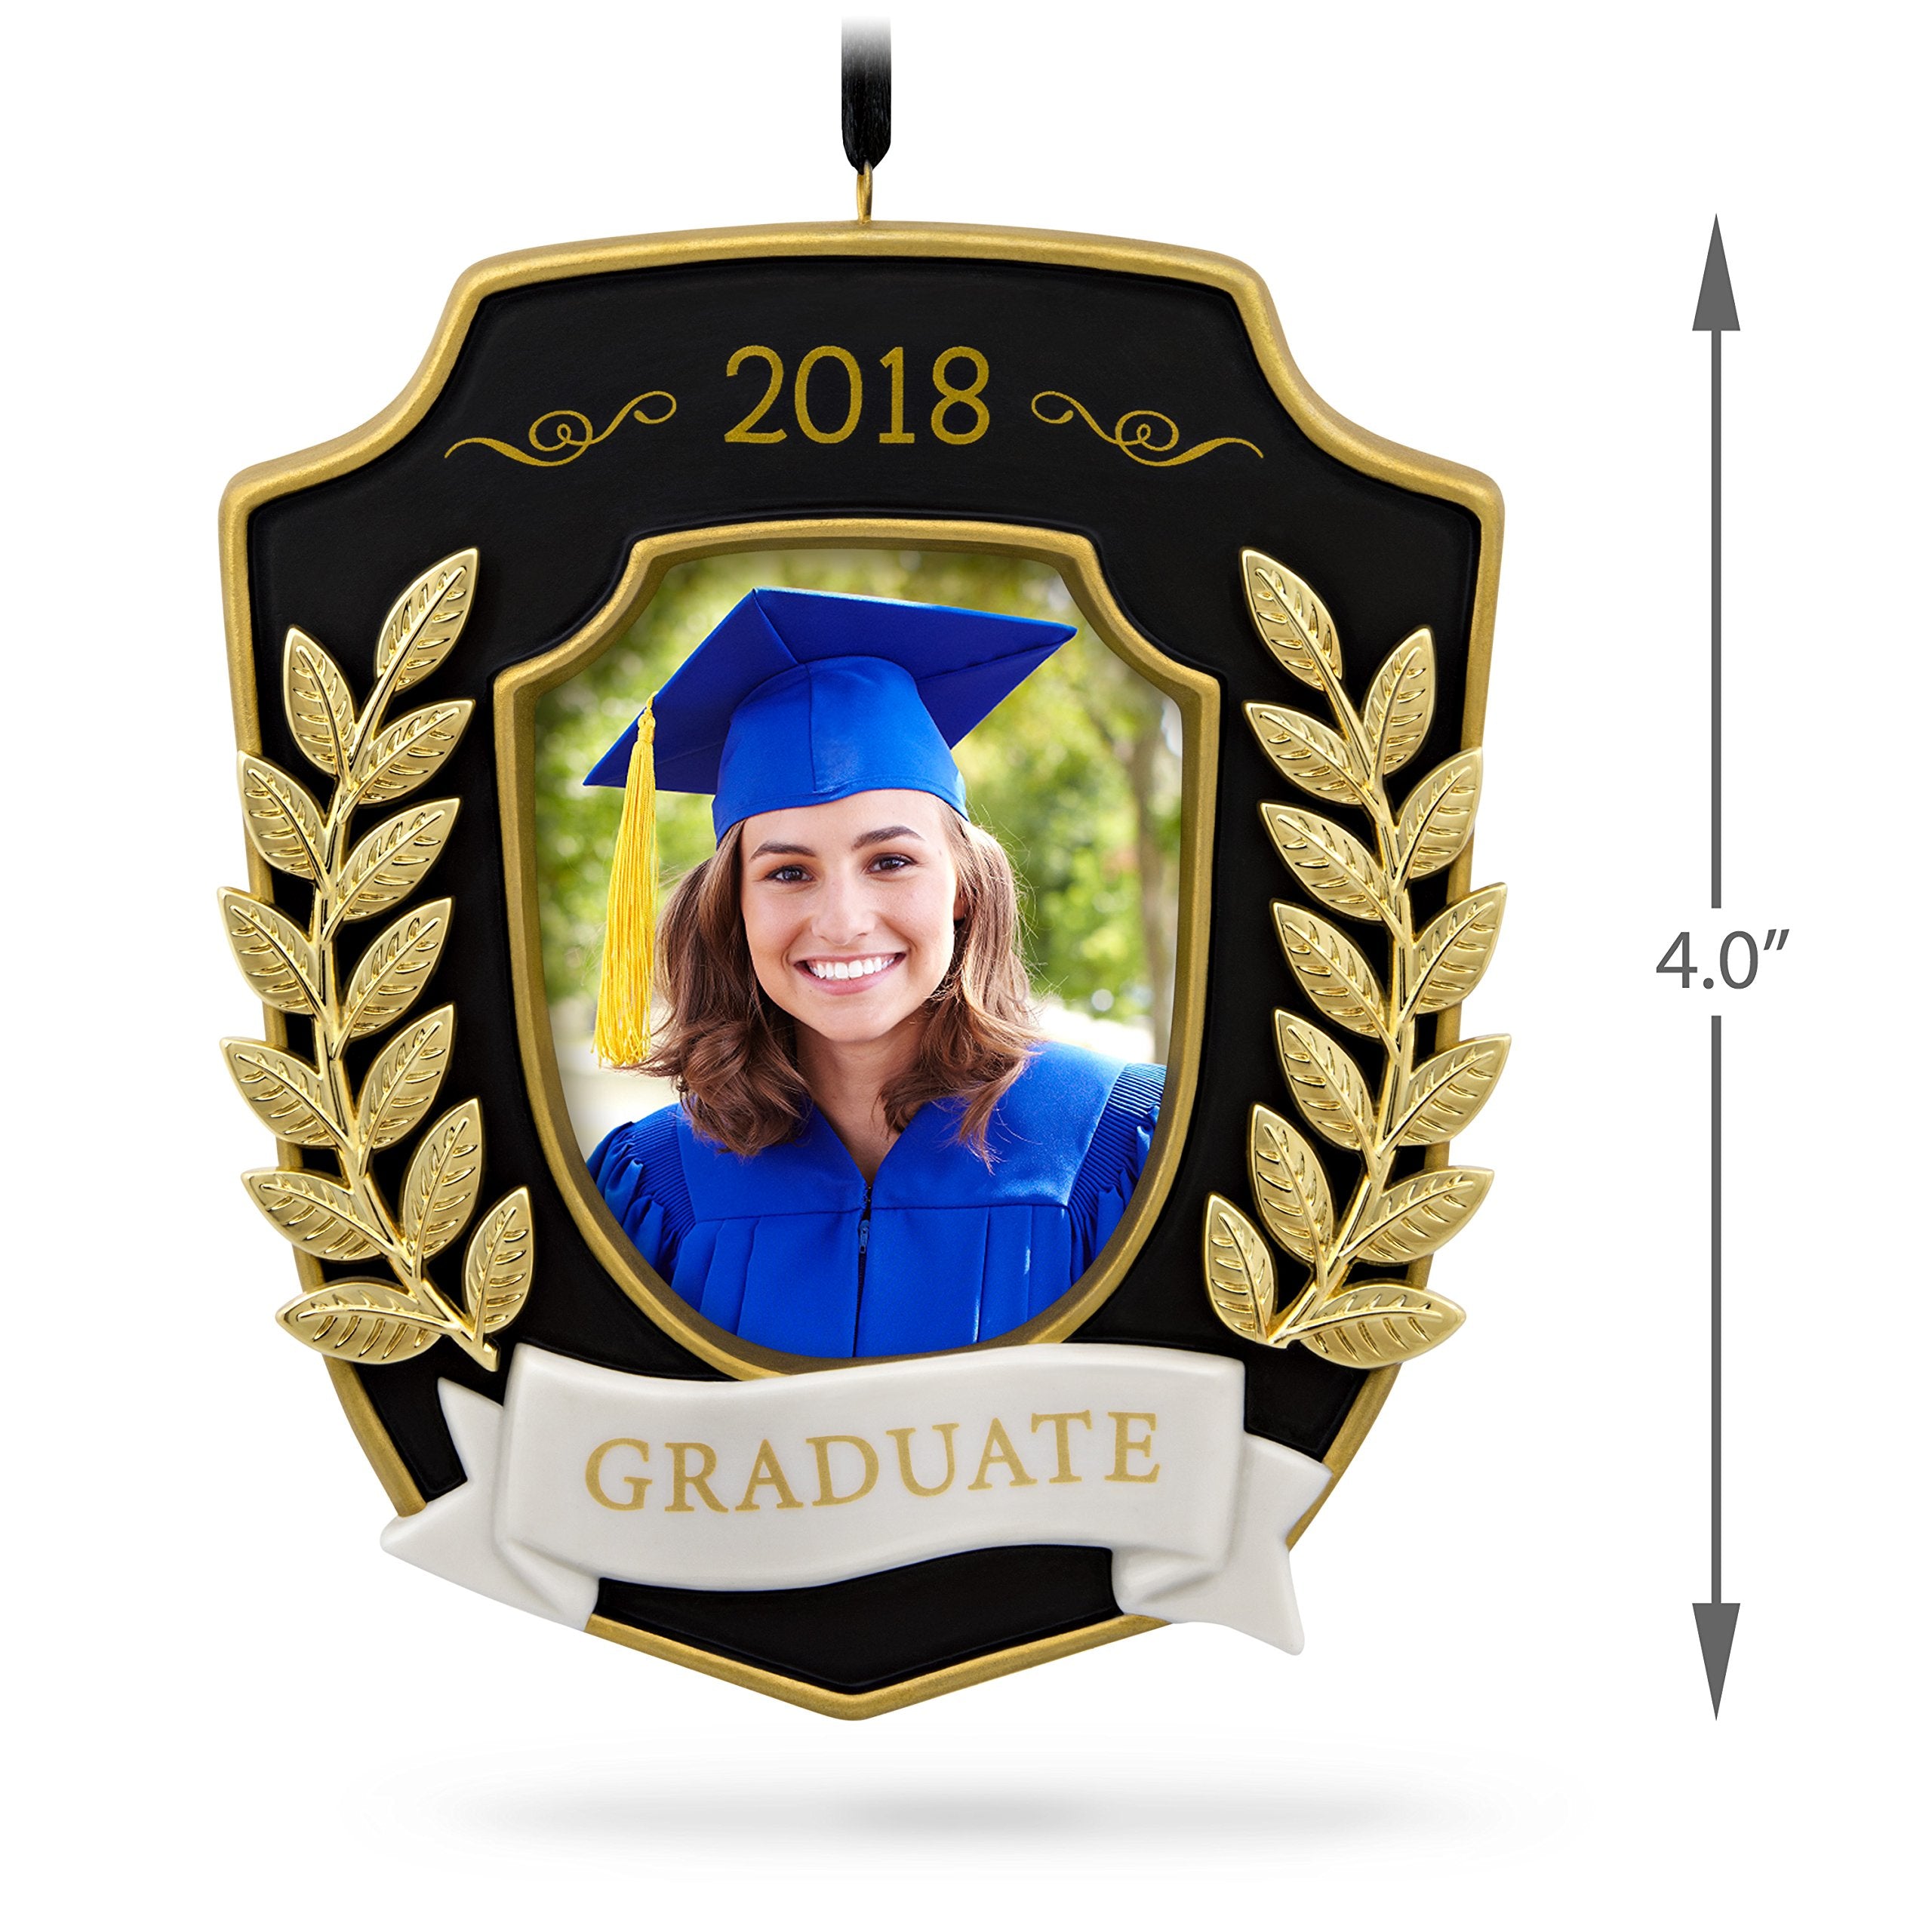 Hallmark Keepsake Christmas Ornament 2018 Year Dated Graduation Gift Congratulations Porcelain and Metal Picture Frame, Photo Frame